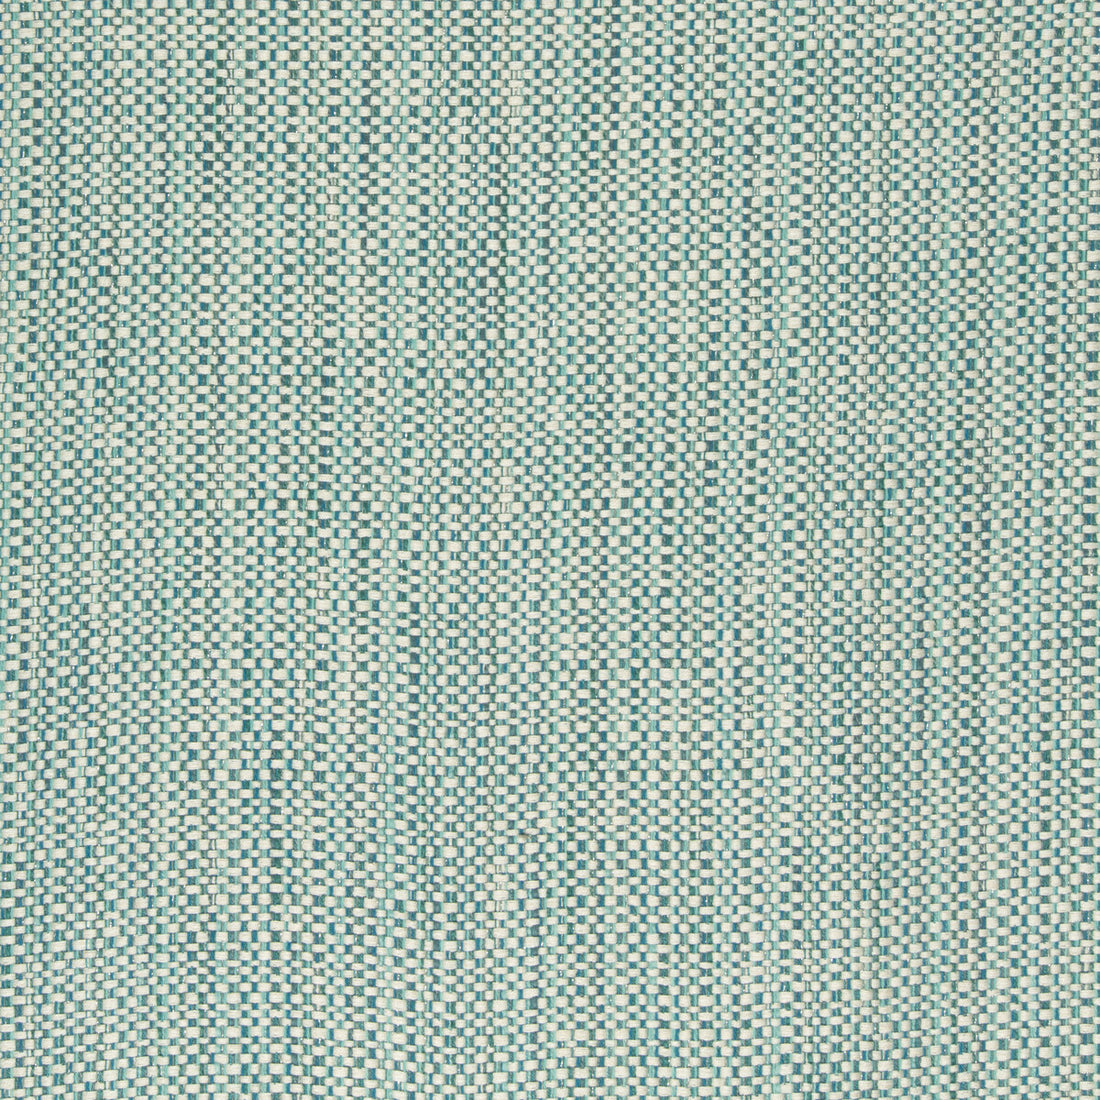 Kravet Contract fabric in 34746-513 color - pattern 34746.513.0 - by Kravet Contract in the Incase Crypton Gis collection